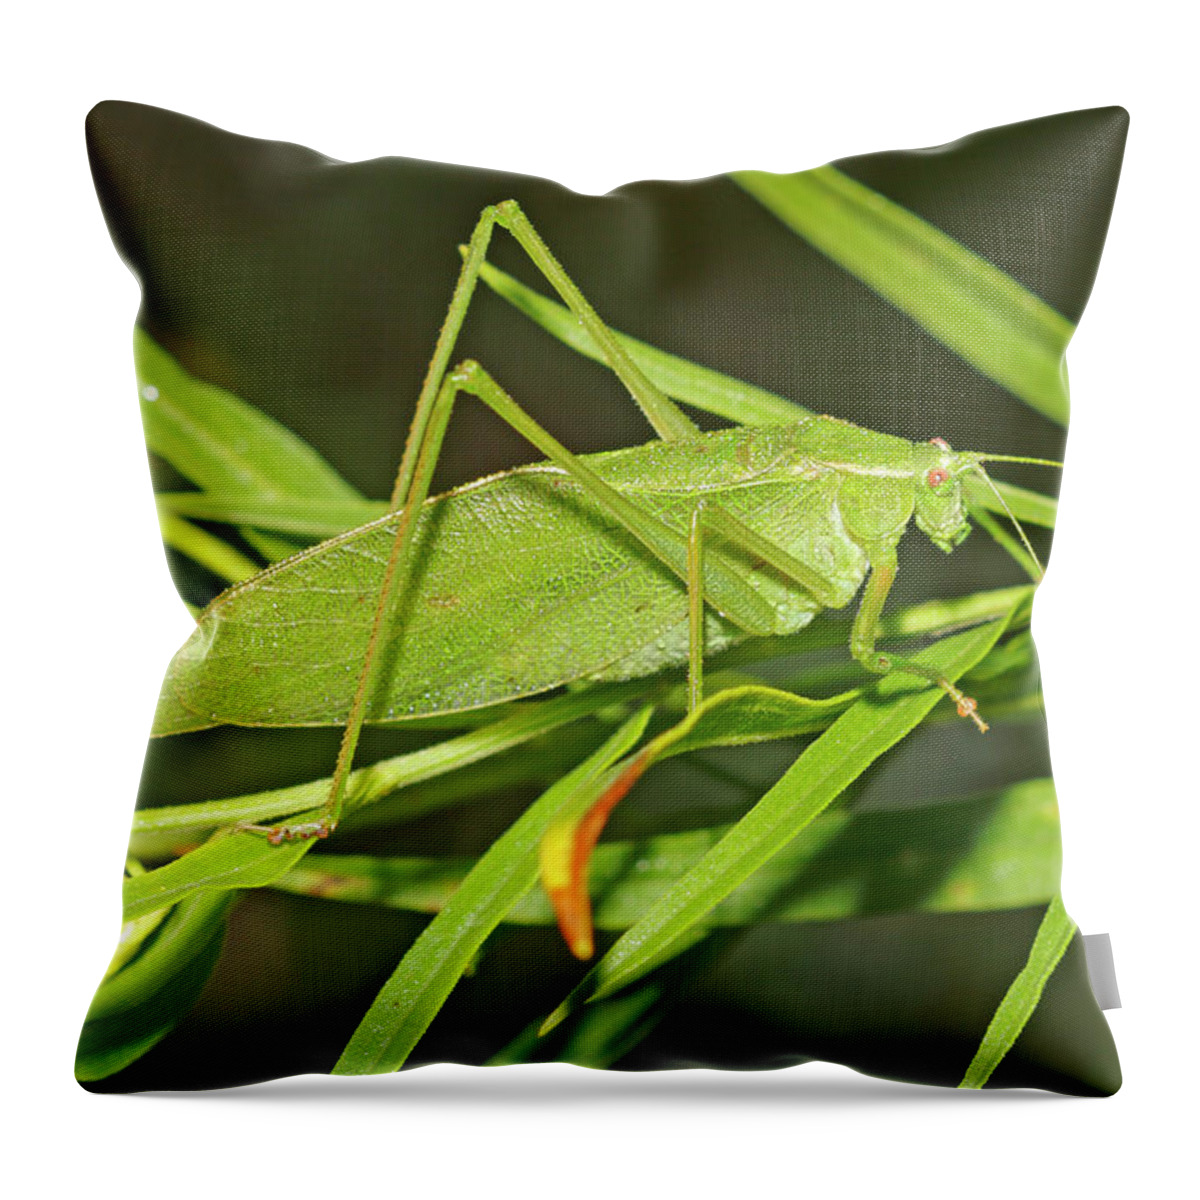 00301204 Throw Pillow featuring the photograph Katydid Mimicking Leaves by Scott Leslie